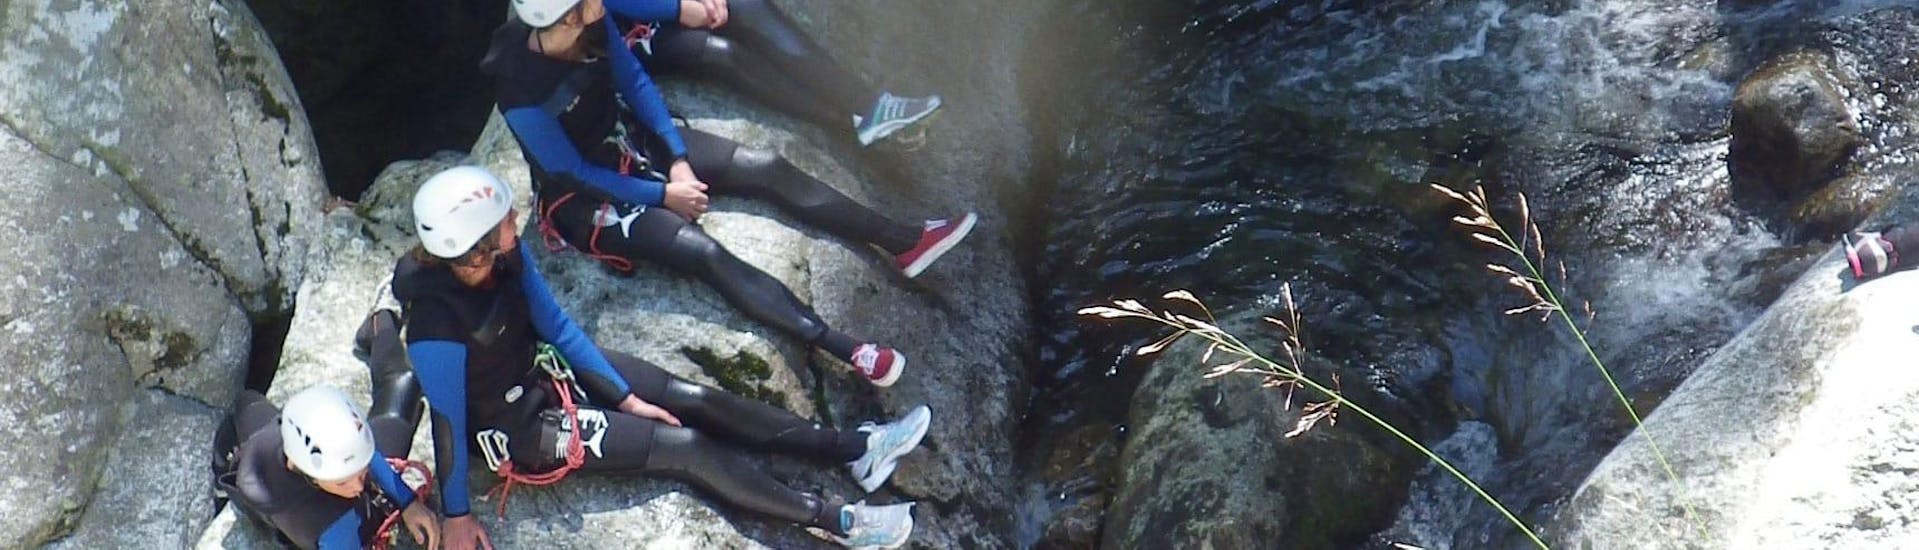 Sportliche Canyoning-Tour in Rousses - Cévennes.